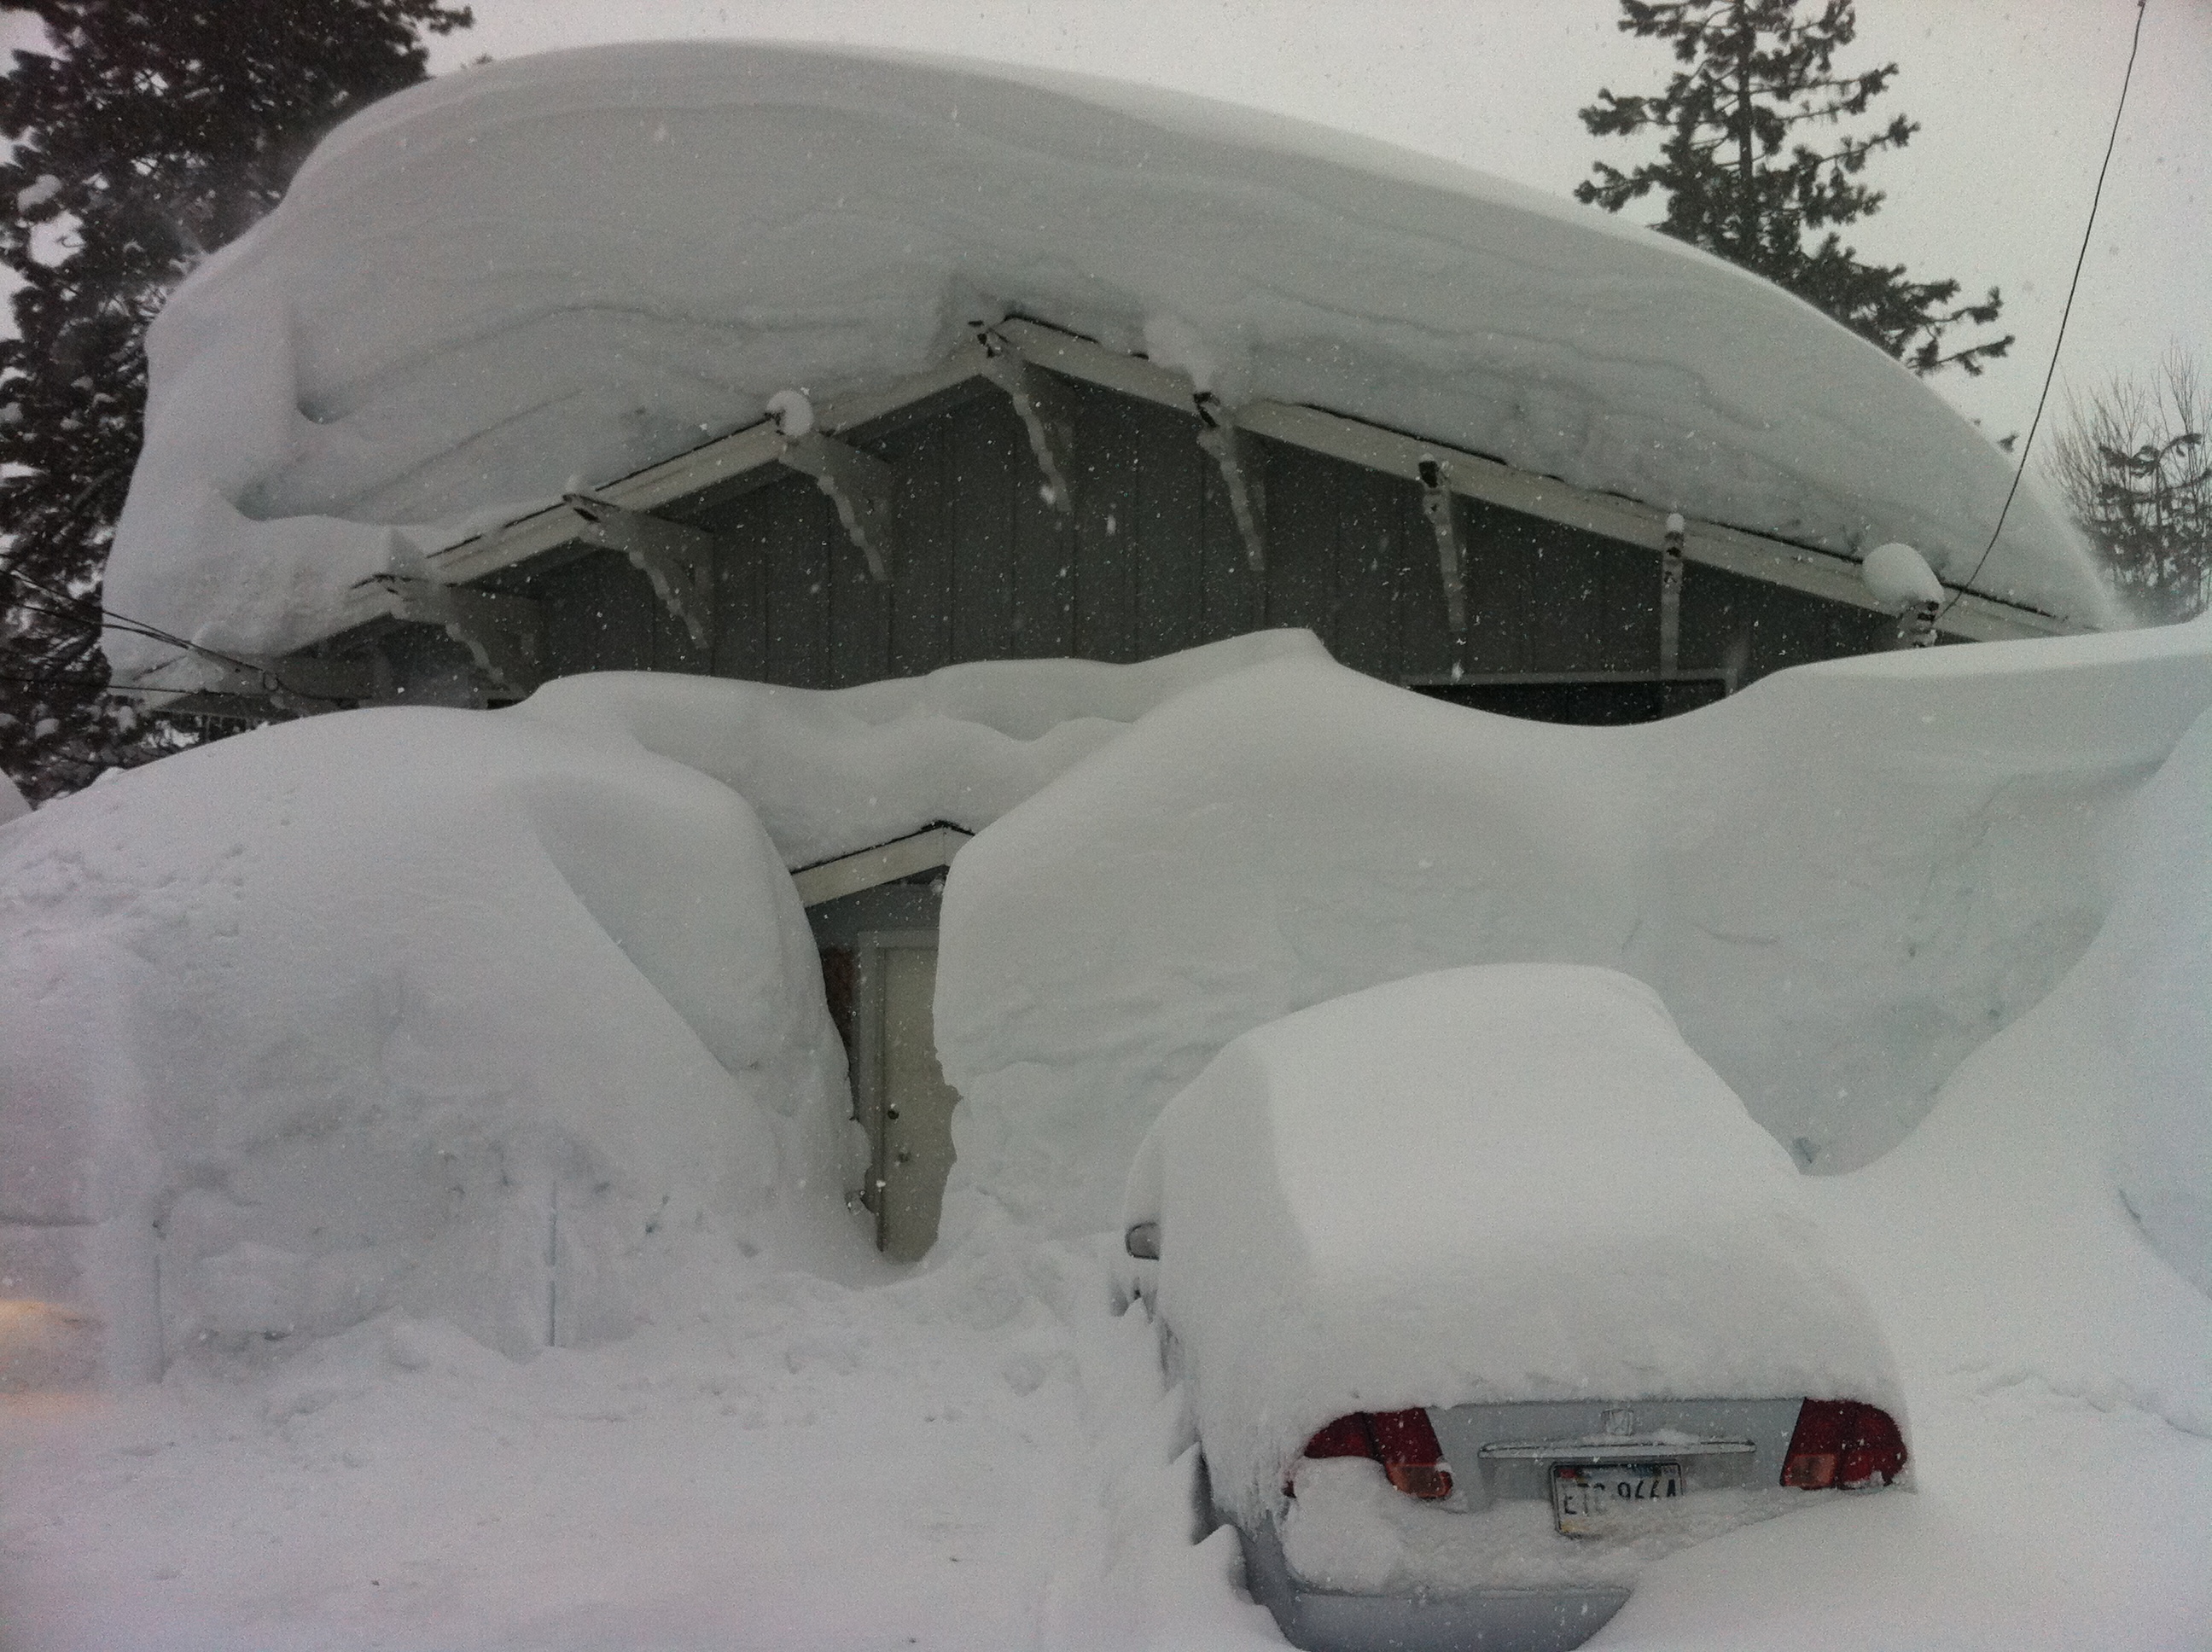 Squaw Valley in March 2011 - the last strong La Nina. photo: snowbrains